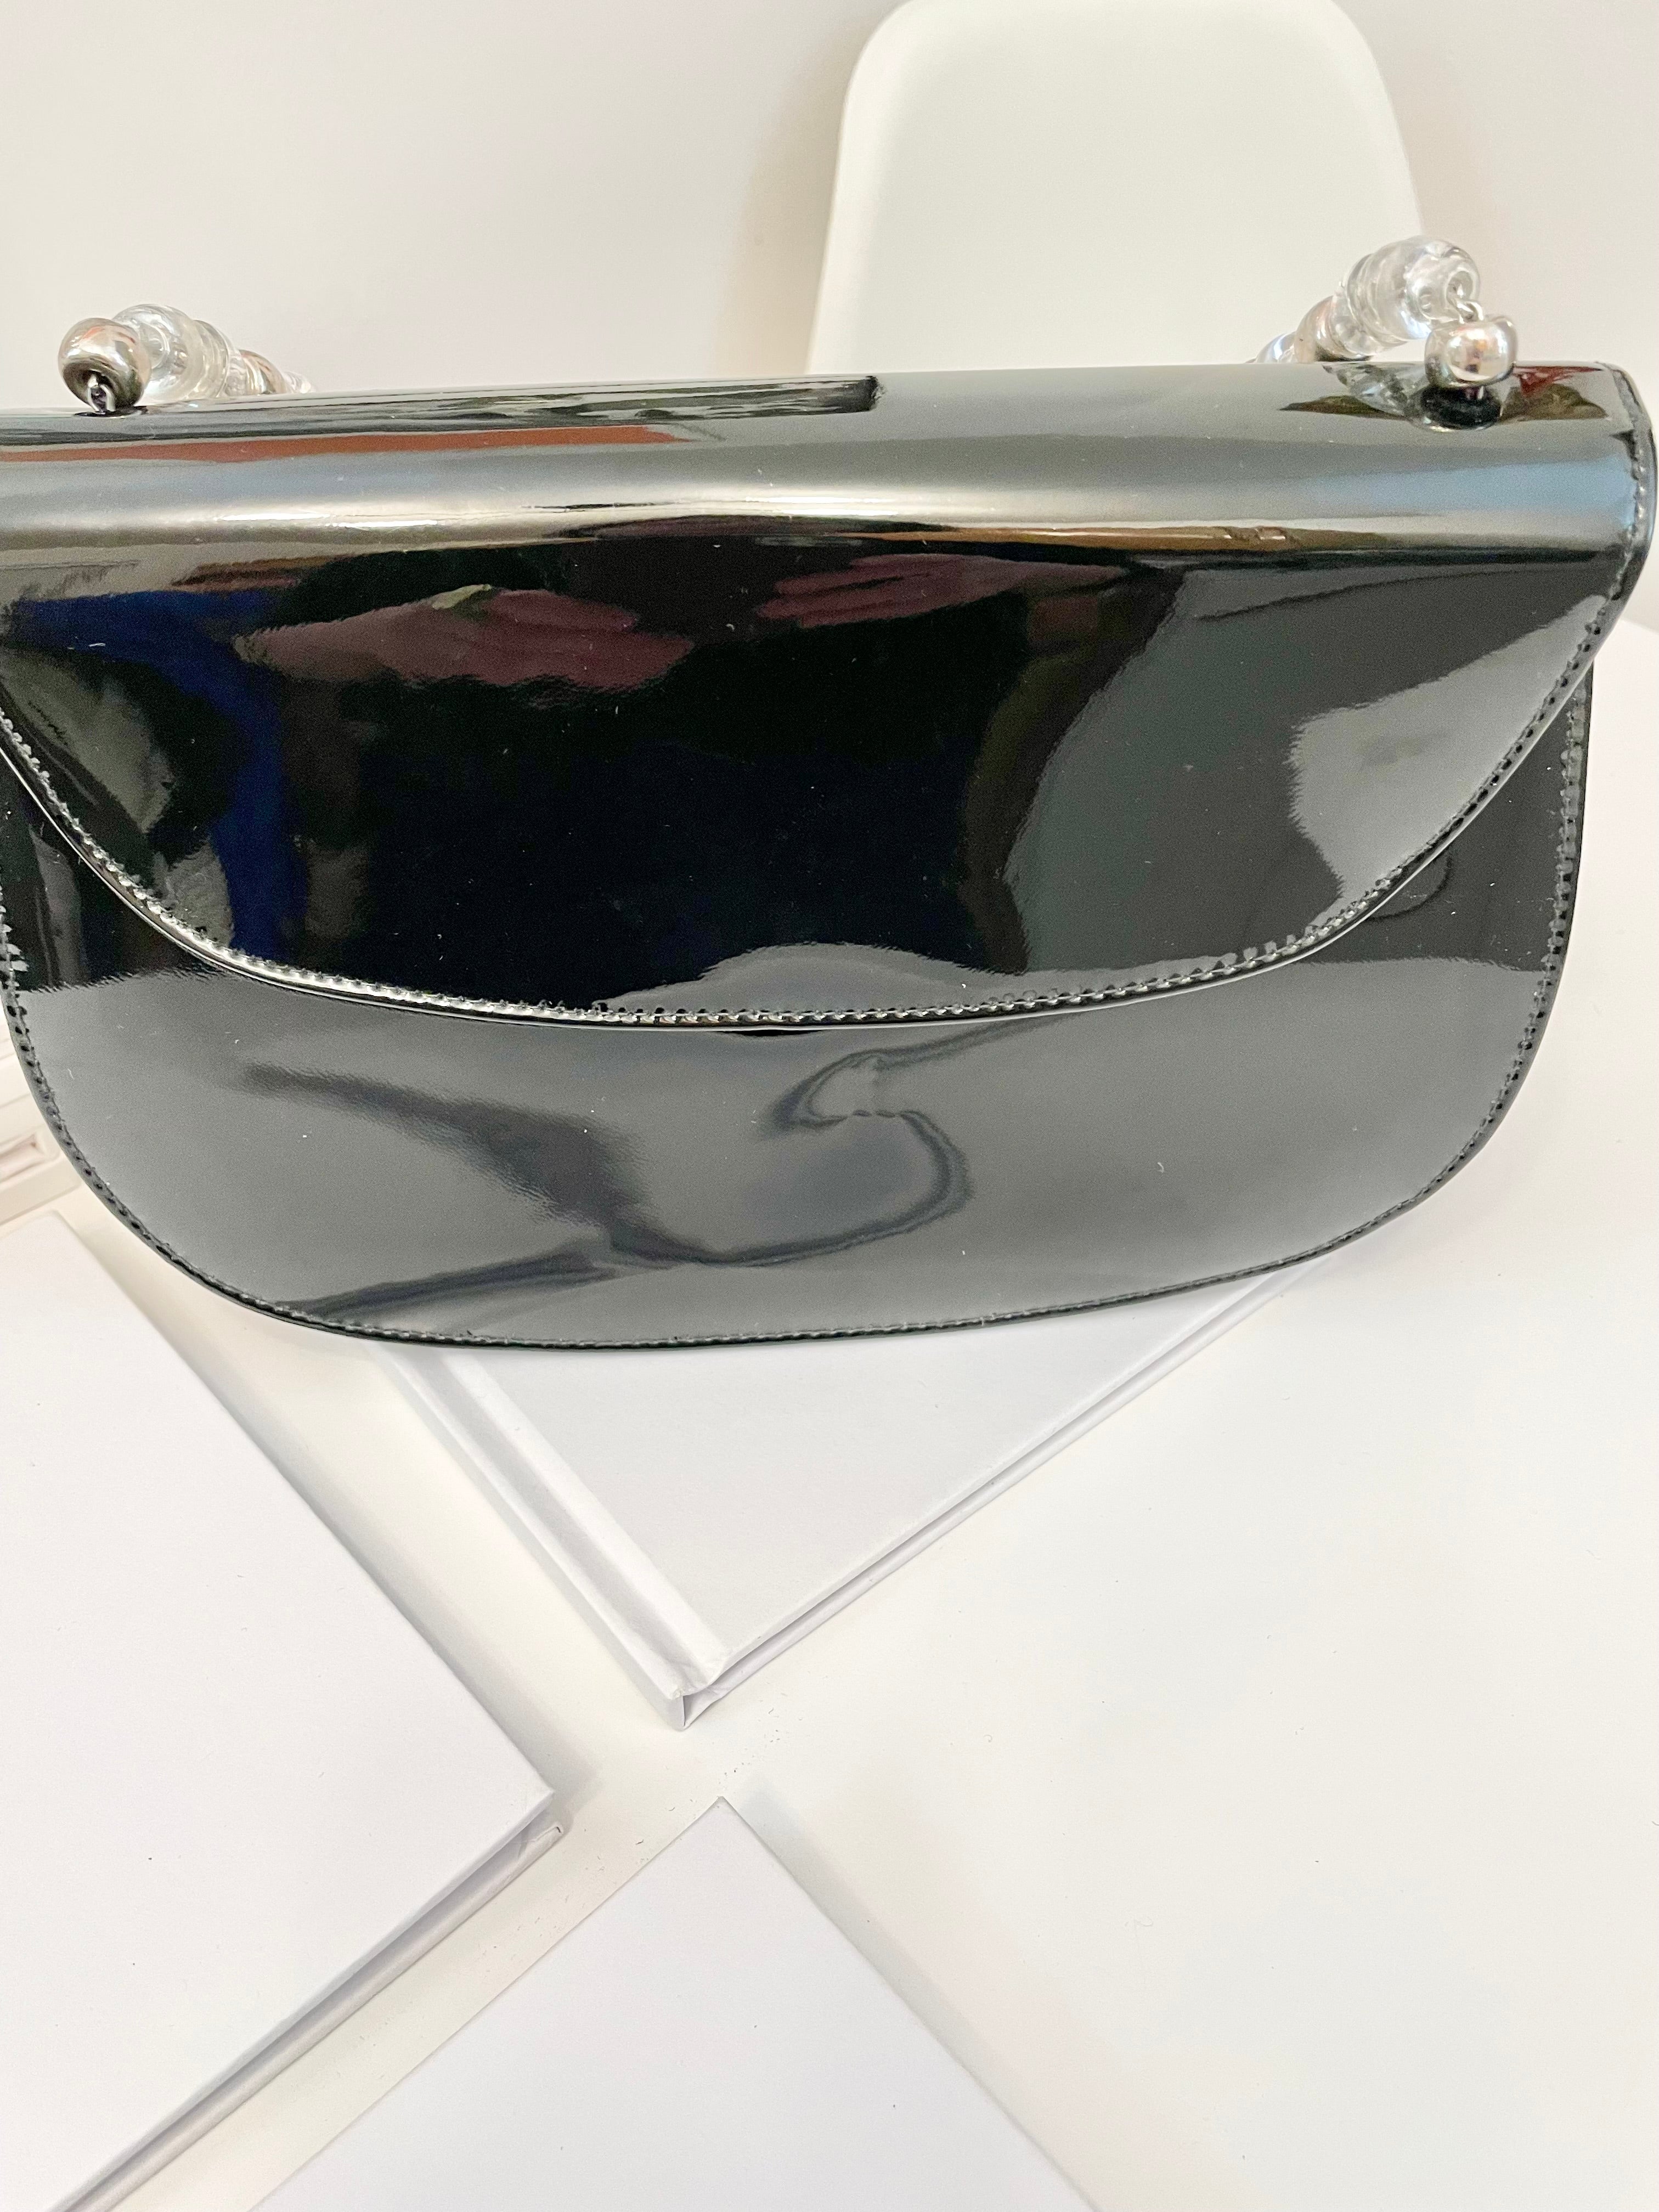 Truly classic faux patent leather, and lucite handle ladies purse... so classy!